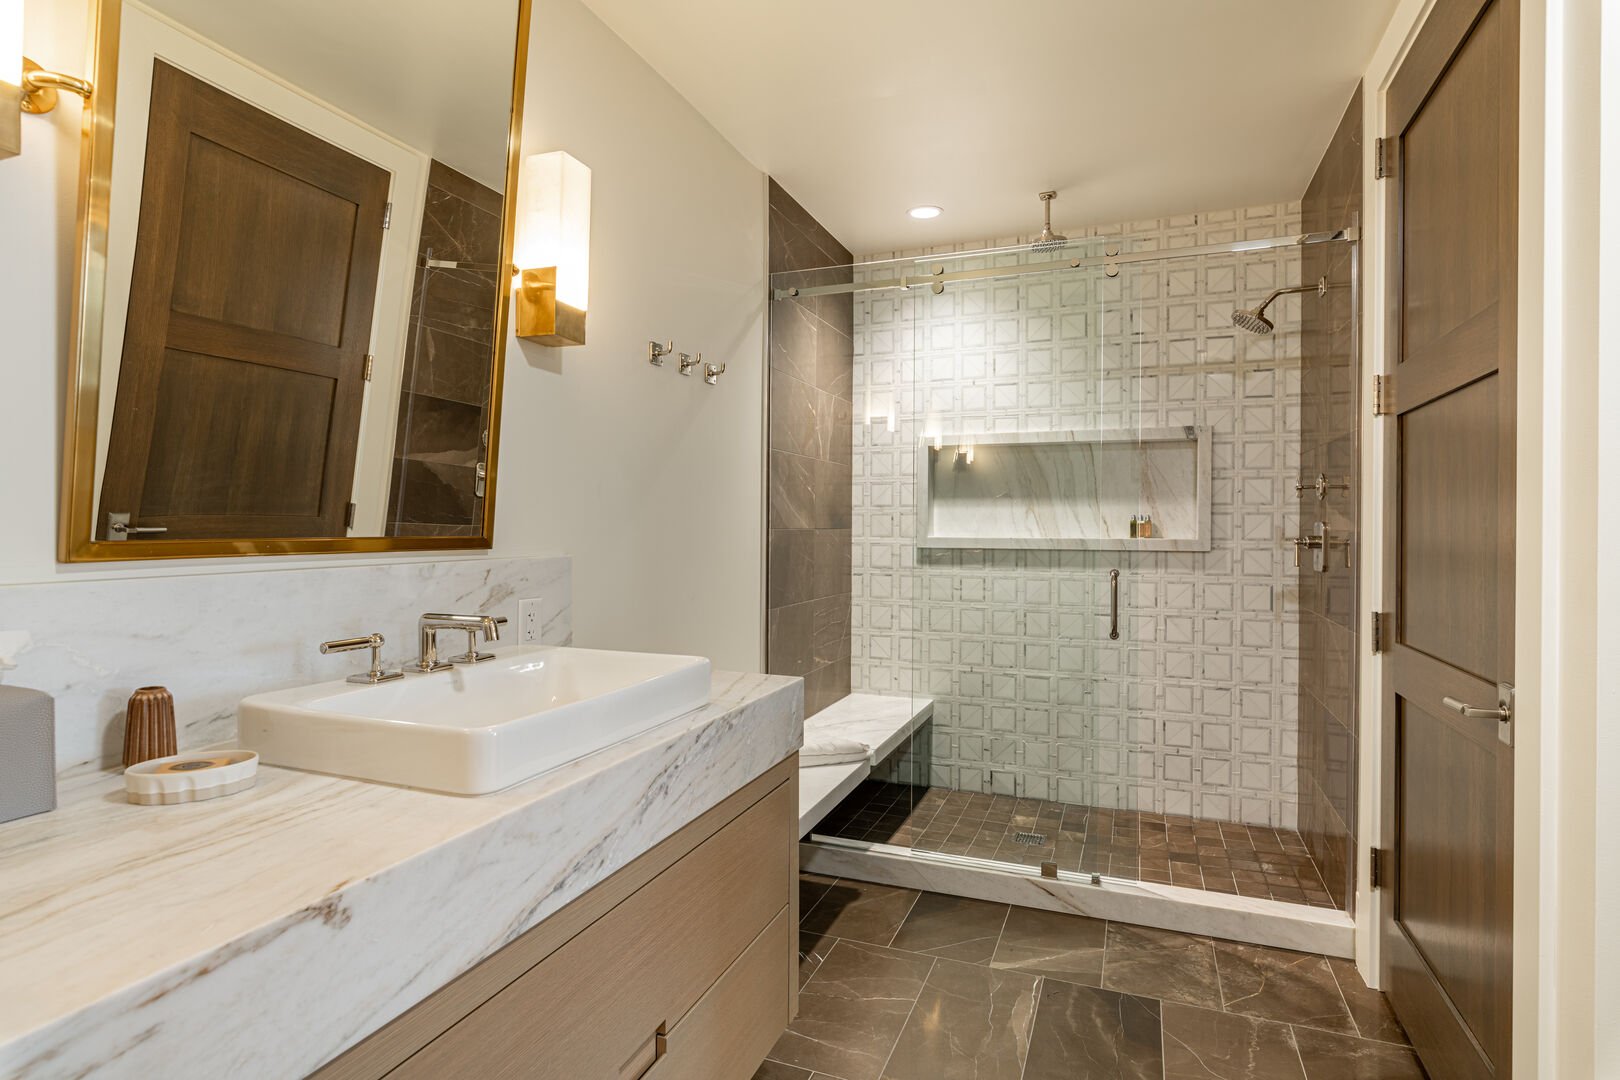 Ensuite bathroom with spacious shower.